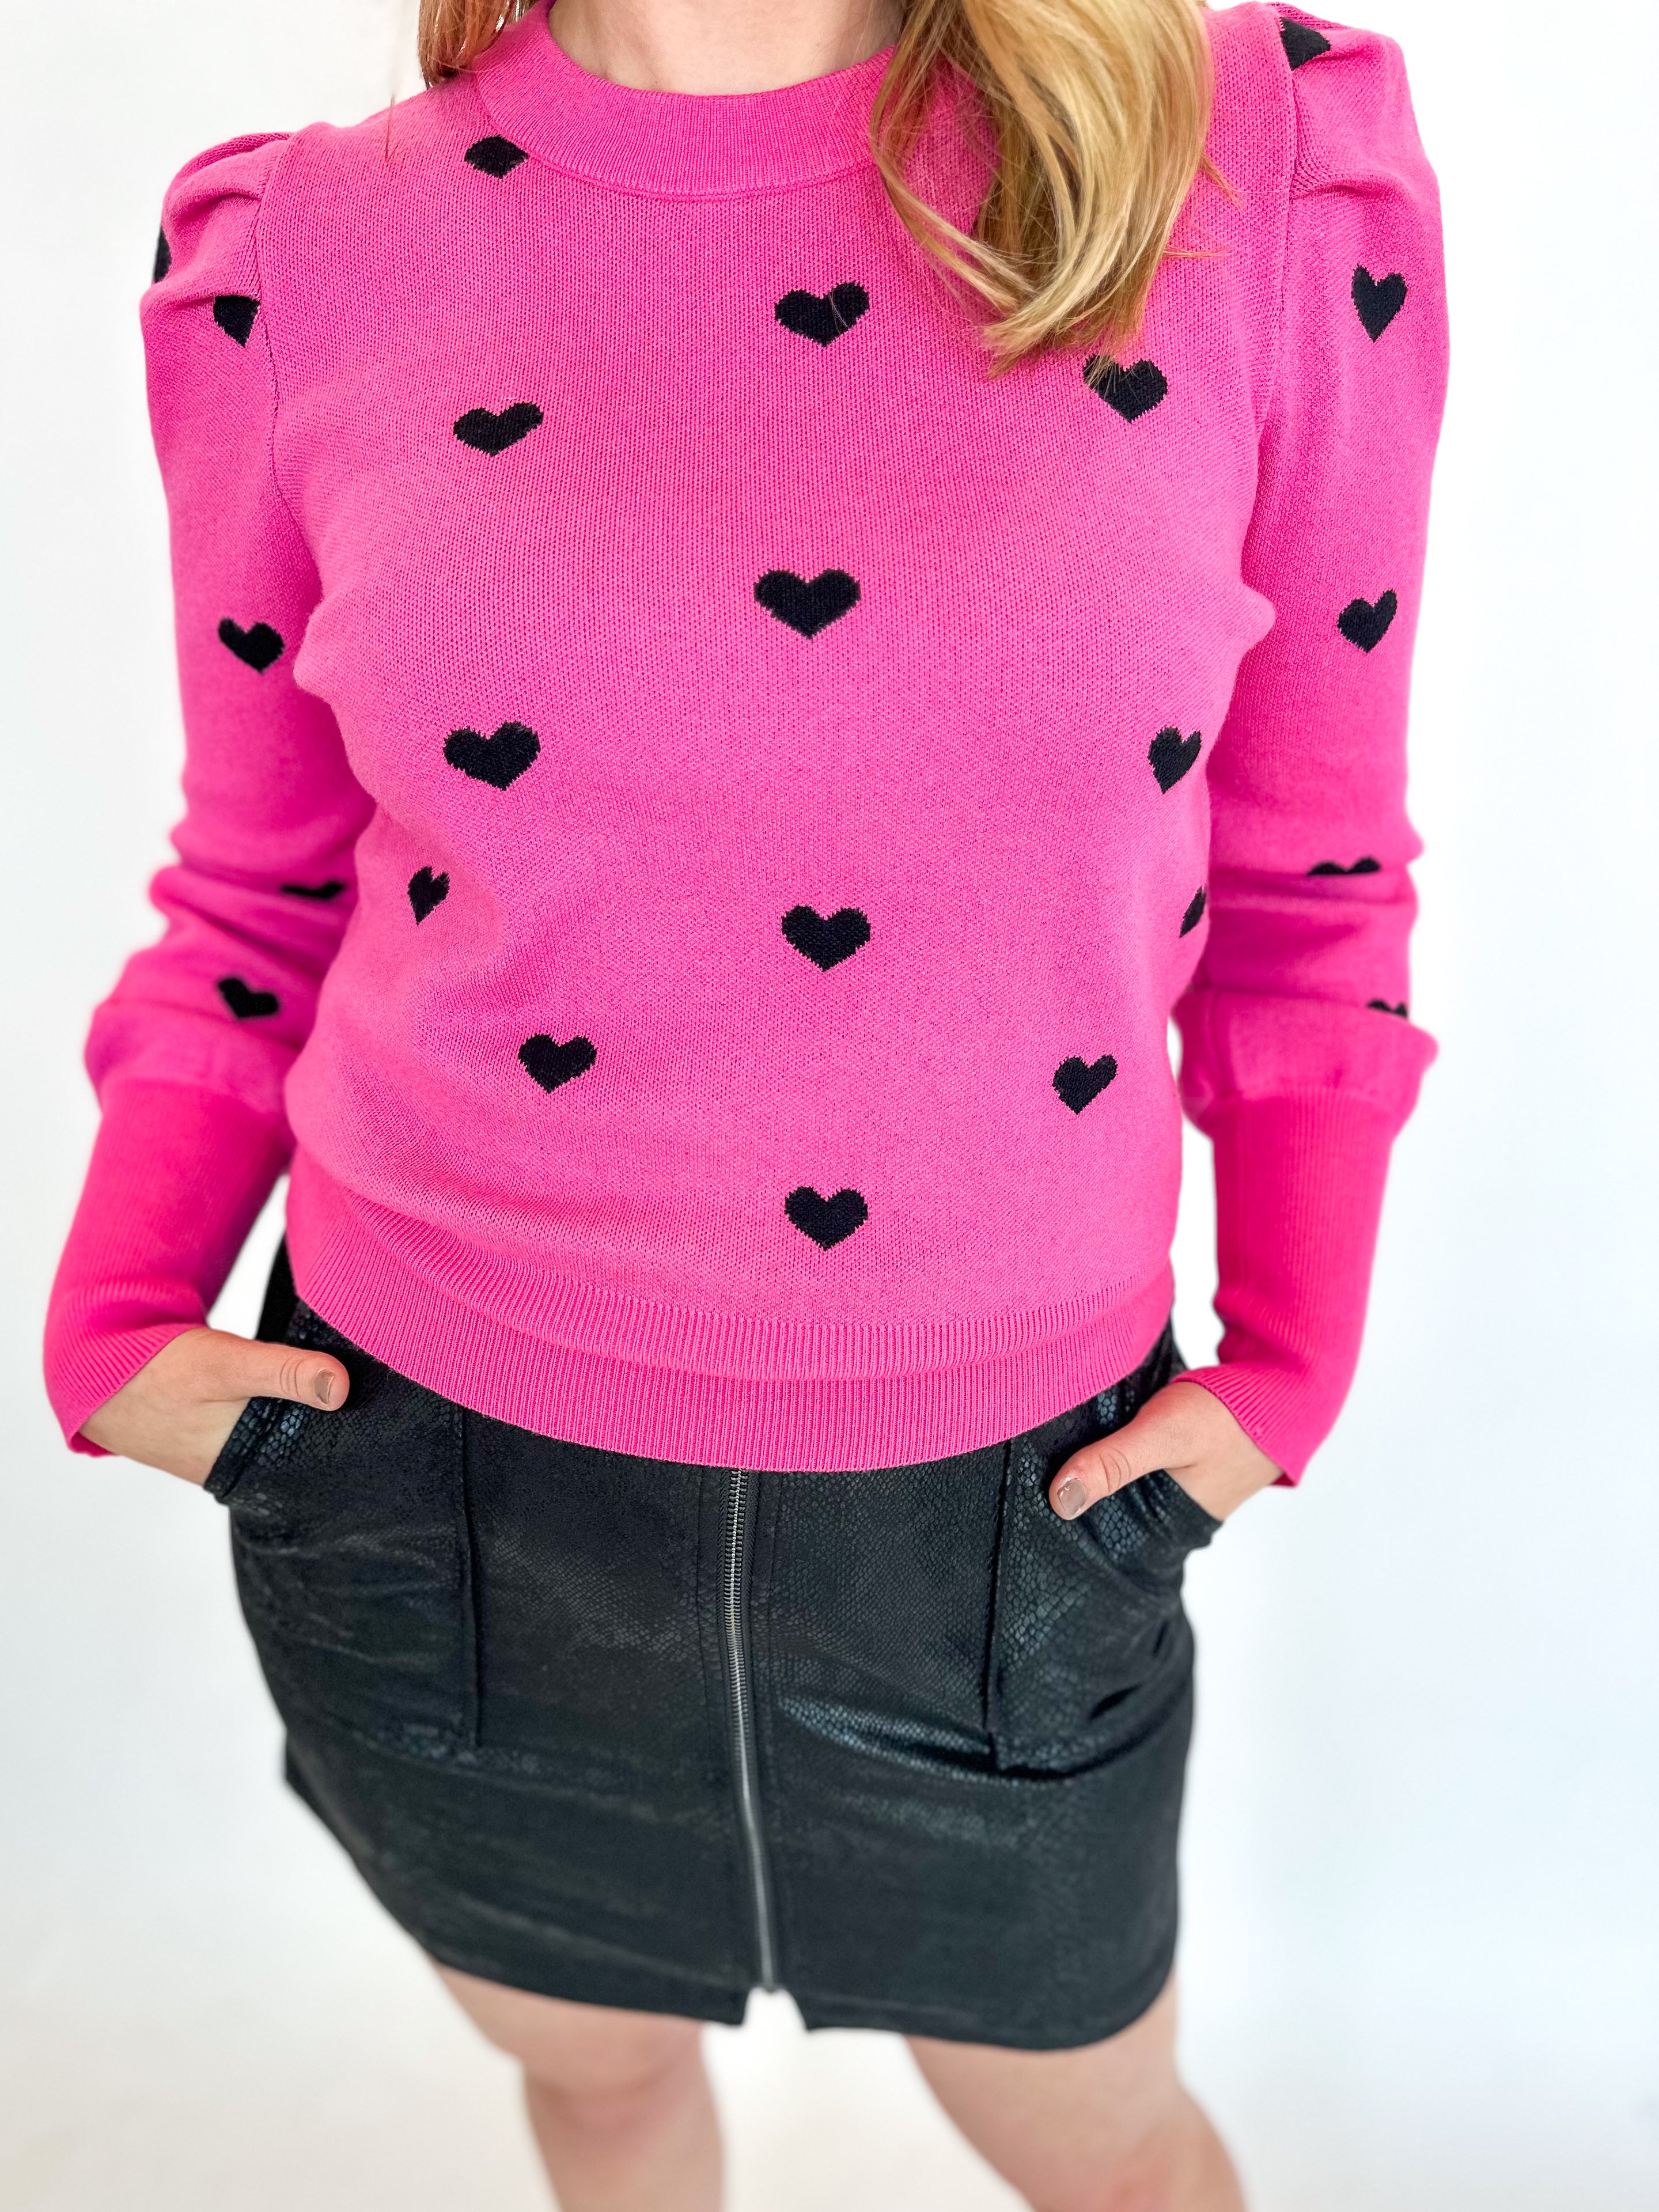 Queen Of Hearts Sweater-230 Sweaters/Cardis-GILLI CLOTHING-July & June Women's Fashion Boutique Located in San Antonio, Texas